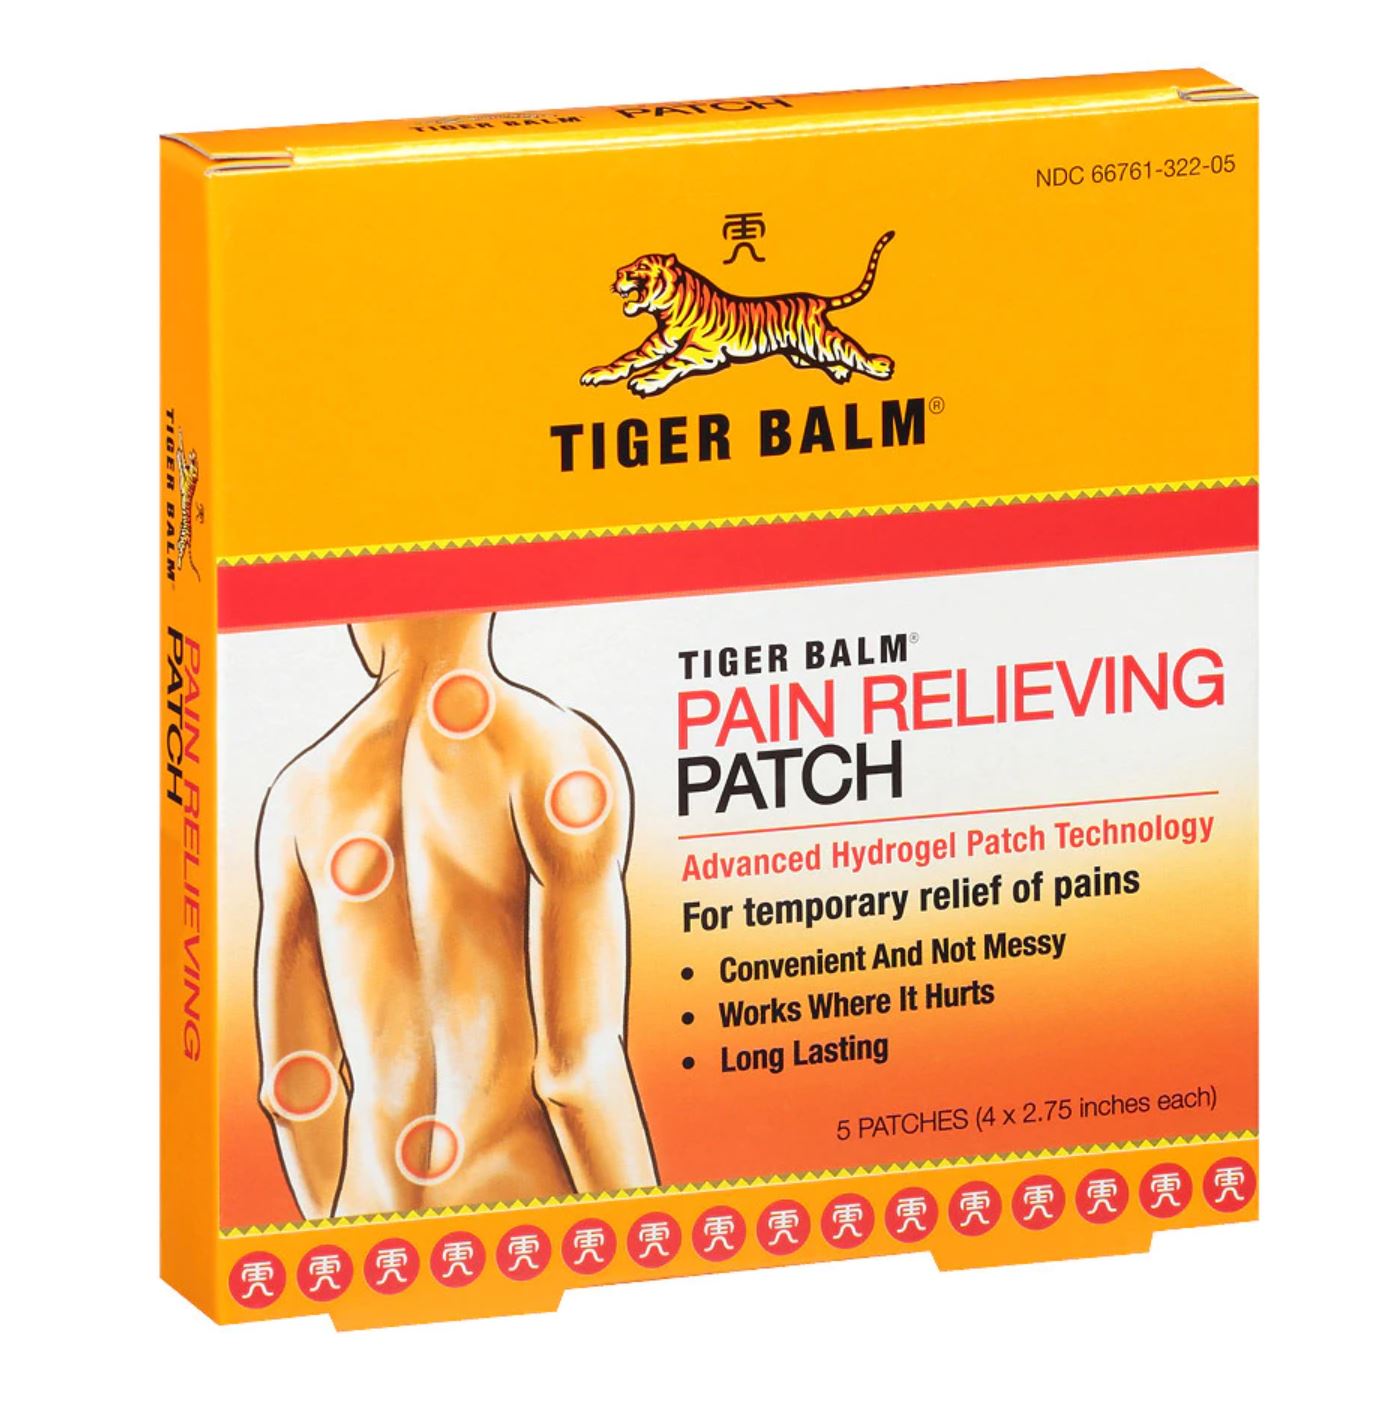 Tiger Balm Pain Relieving Patch 虎标镇痛药布